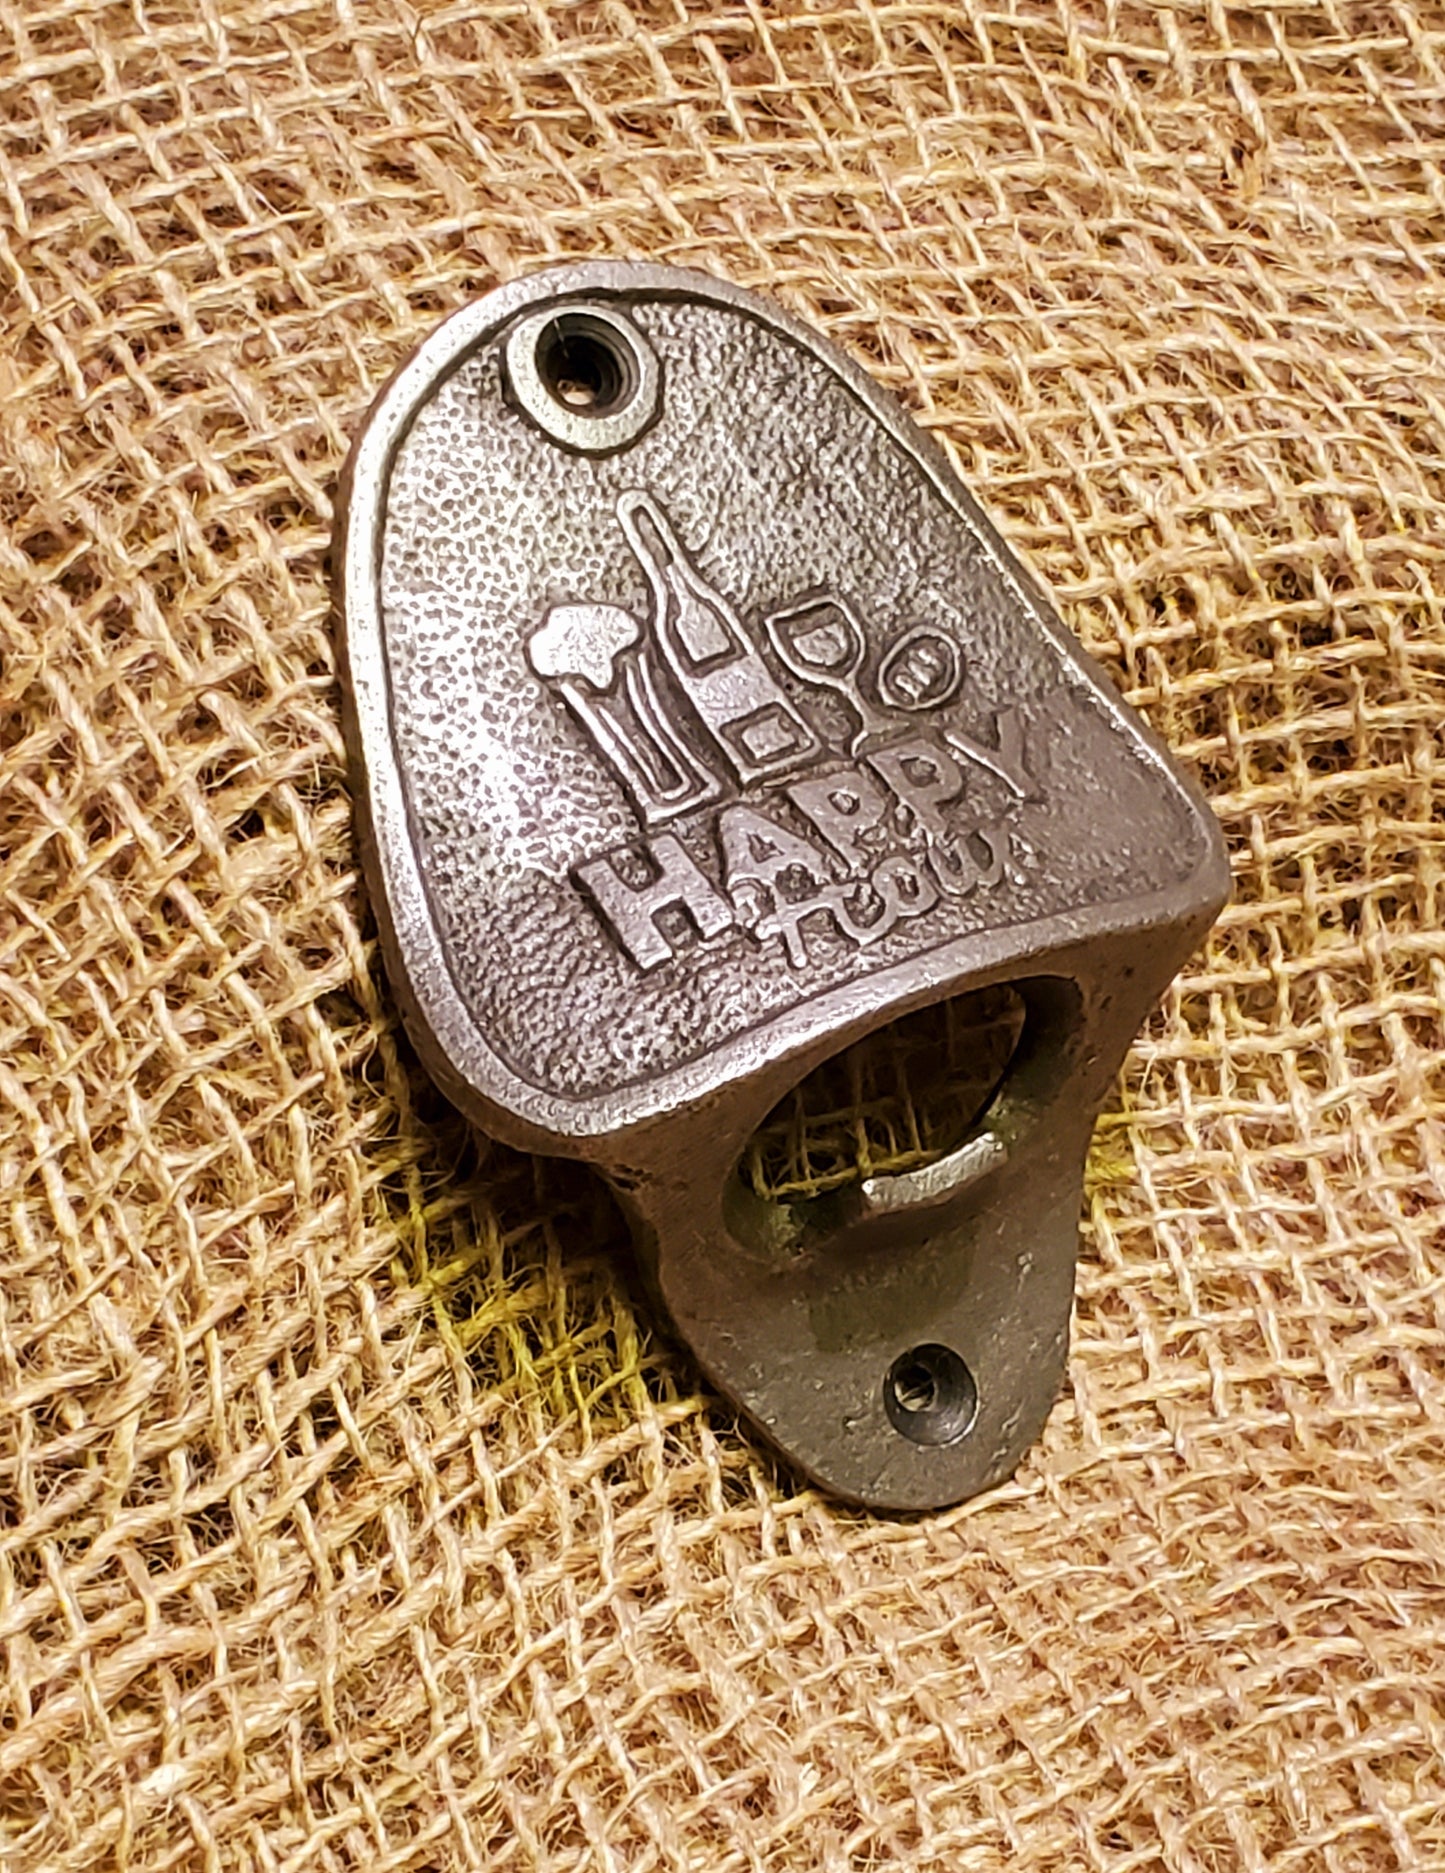 Happy Hour - Bottle Opener - Spearhead Collection - Bottle Openers - Bottle Openers, Gift Ideas